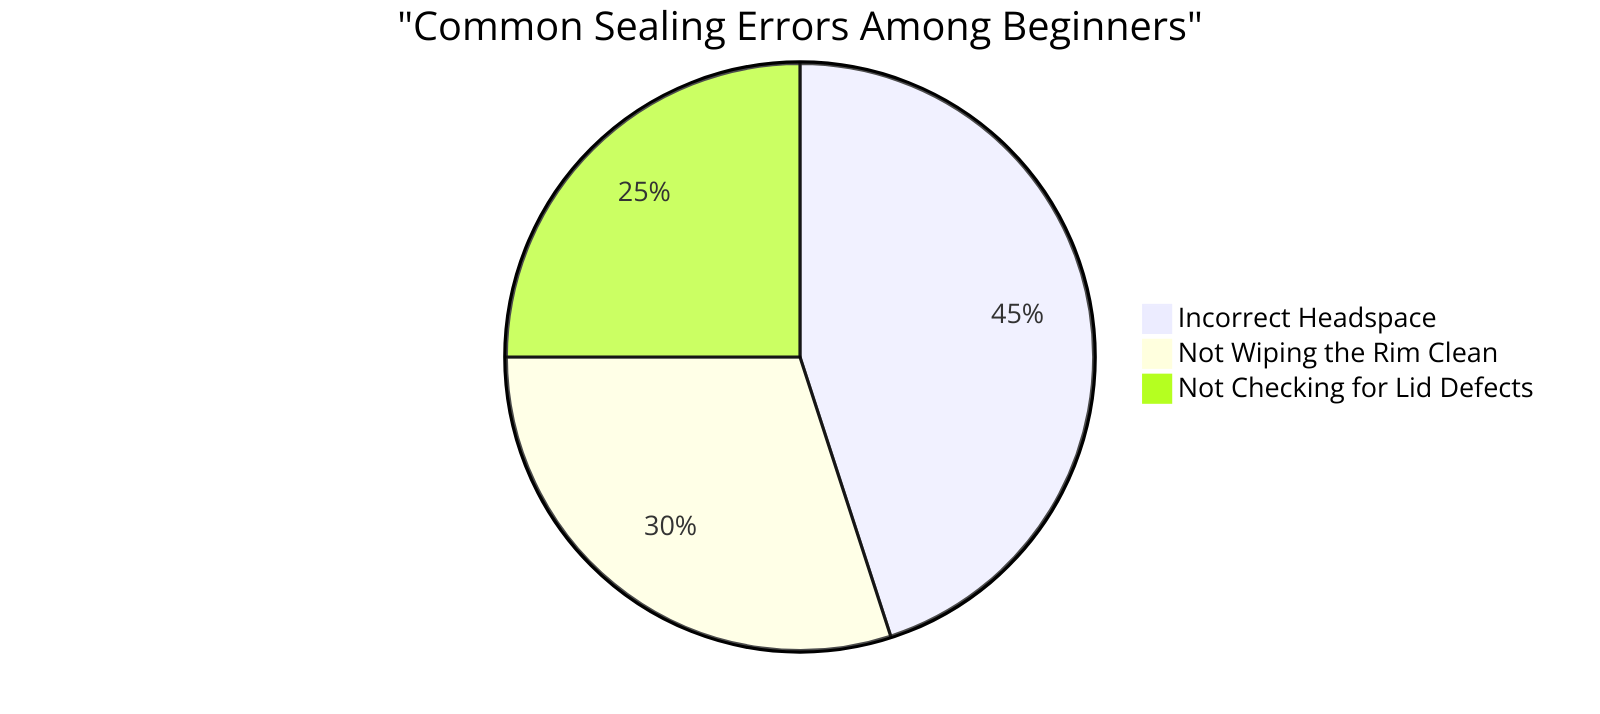  the distribution of common sealing errors among beginners